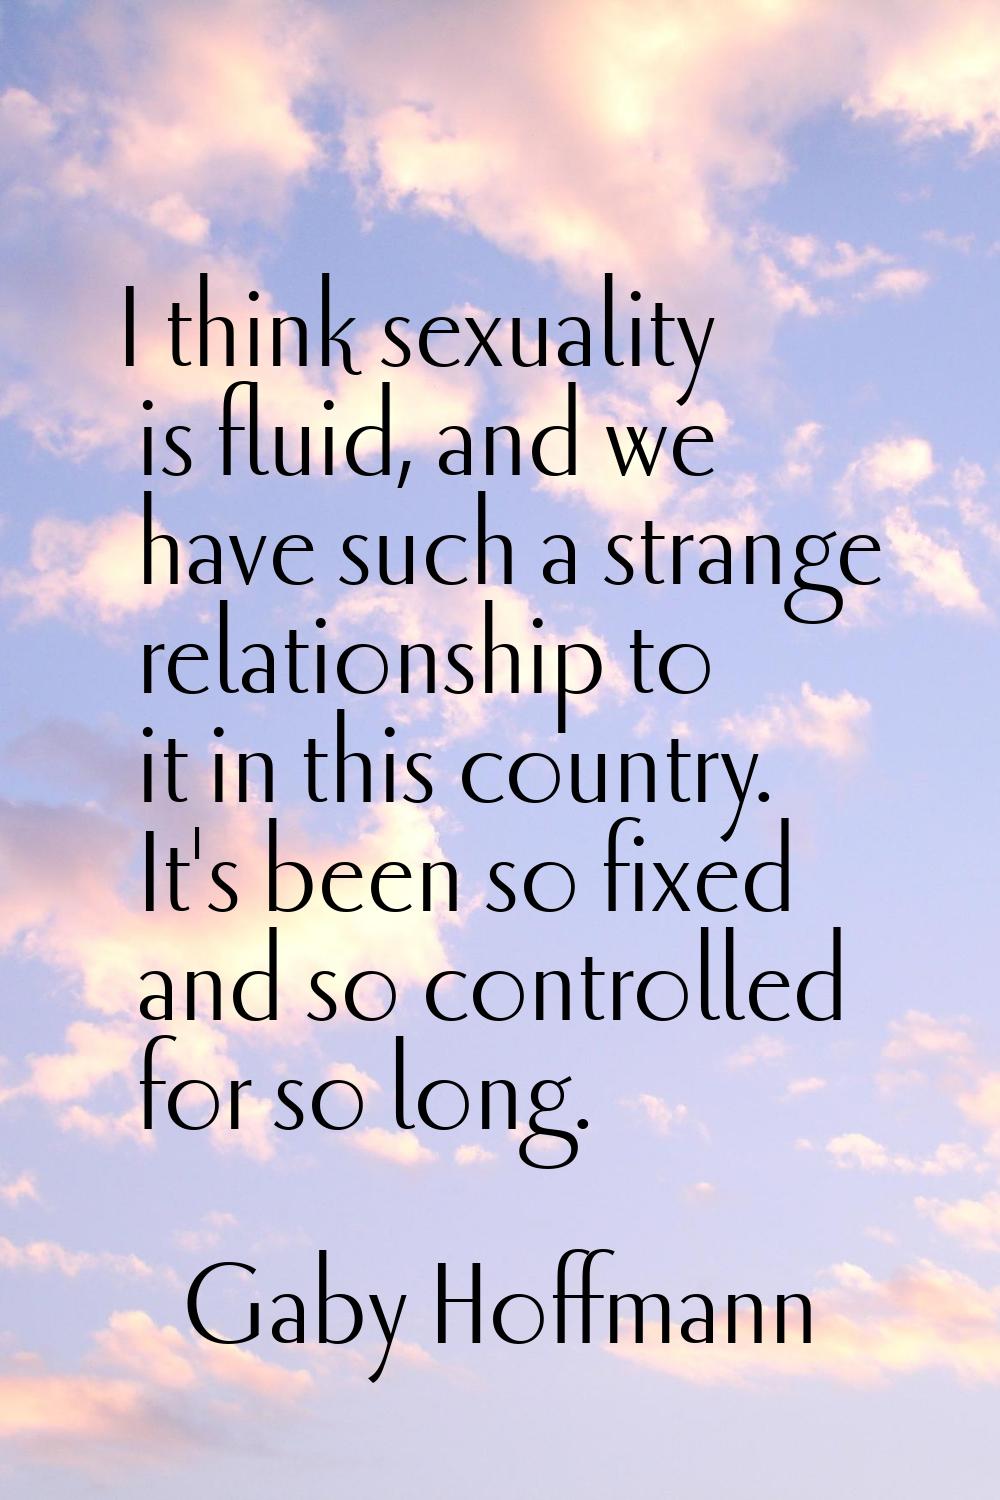 I think sexuality is fluid, and we have such a strange relationship to it in this country. It's bee